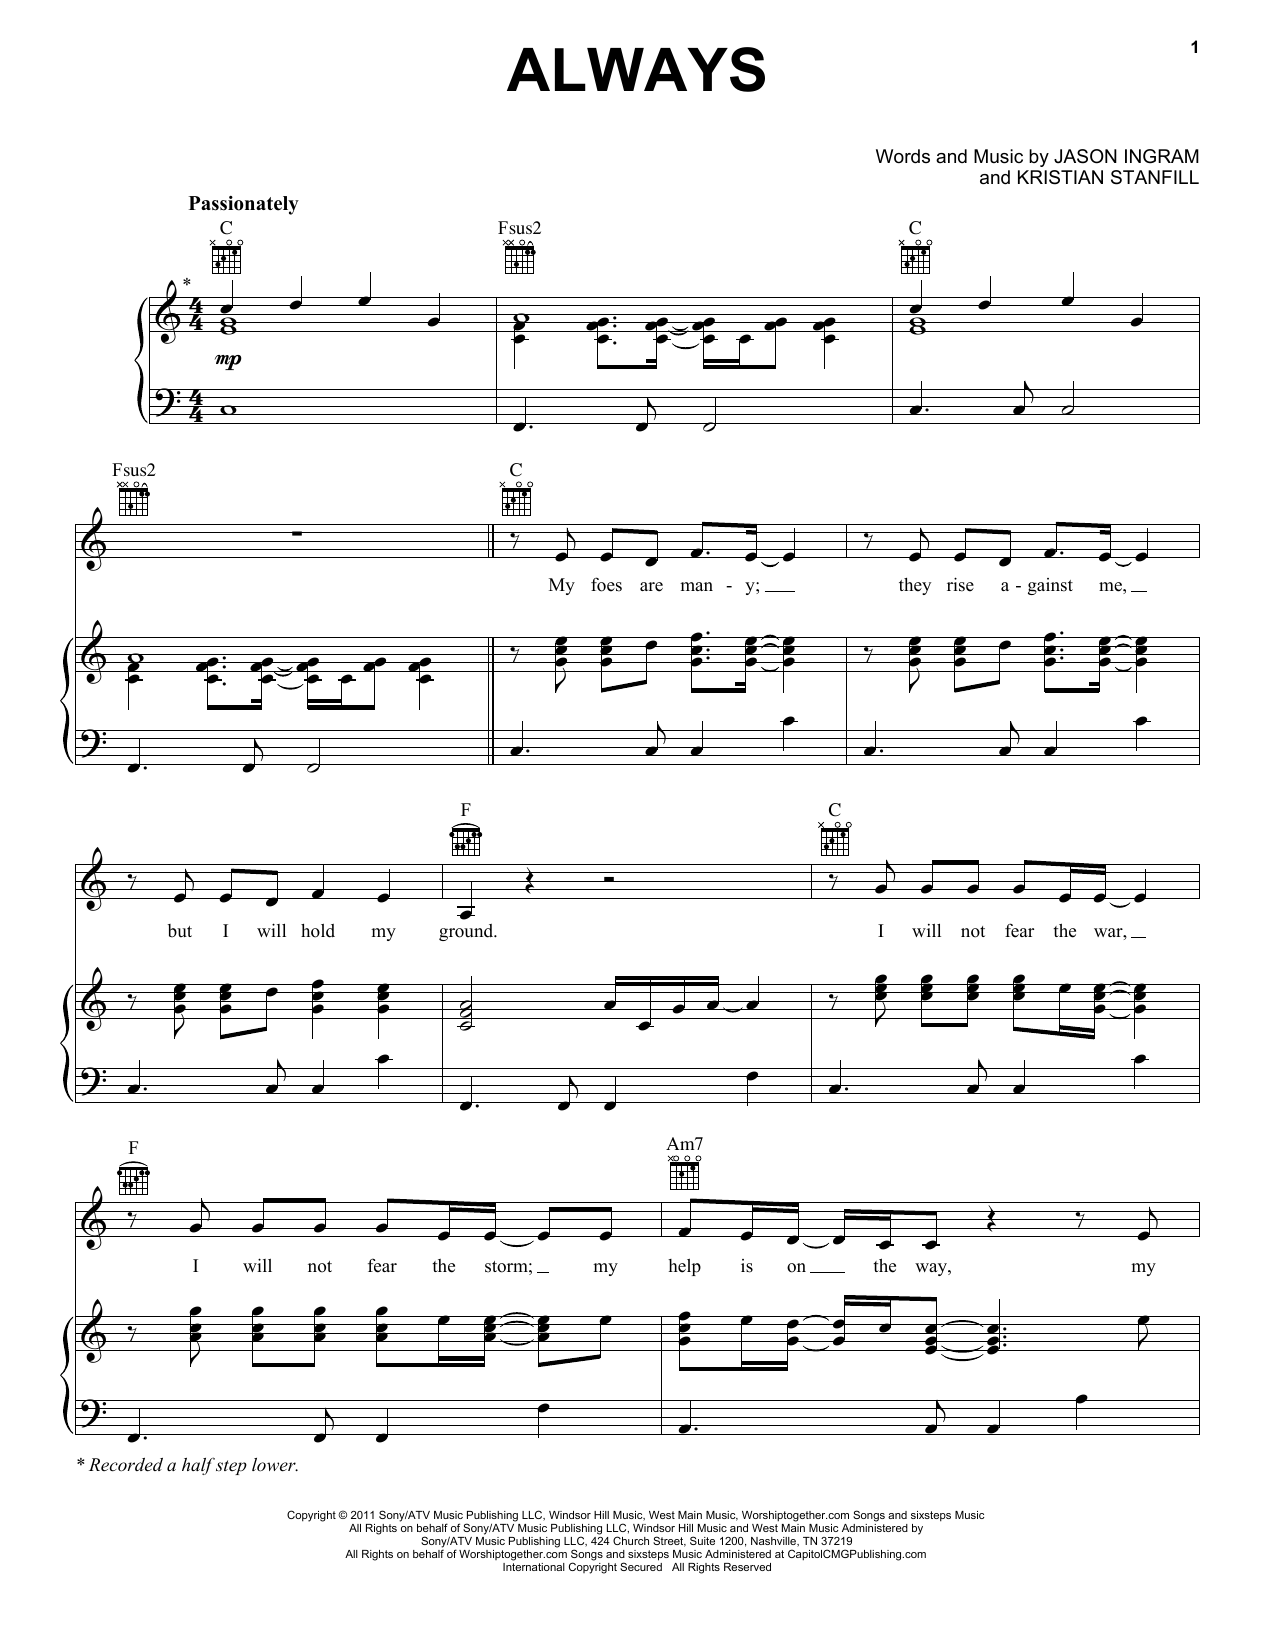 Download Passion Always Sheet Music